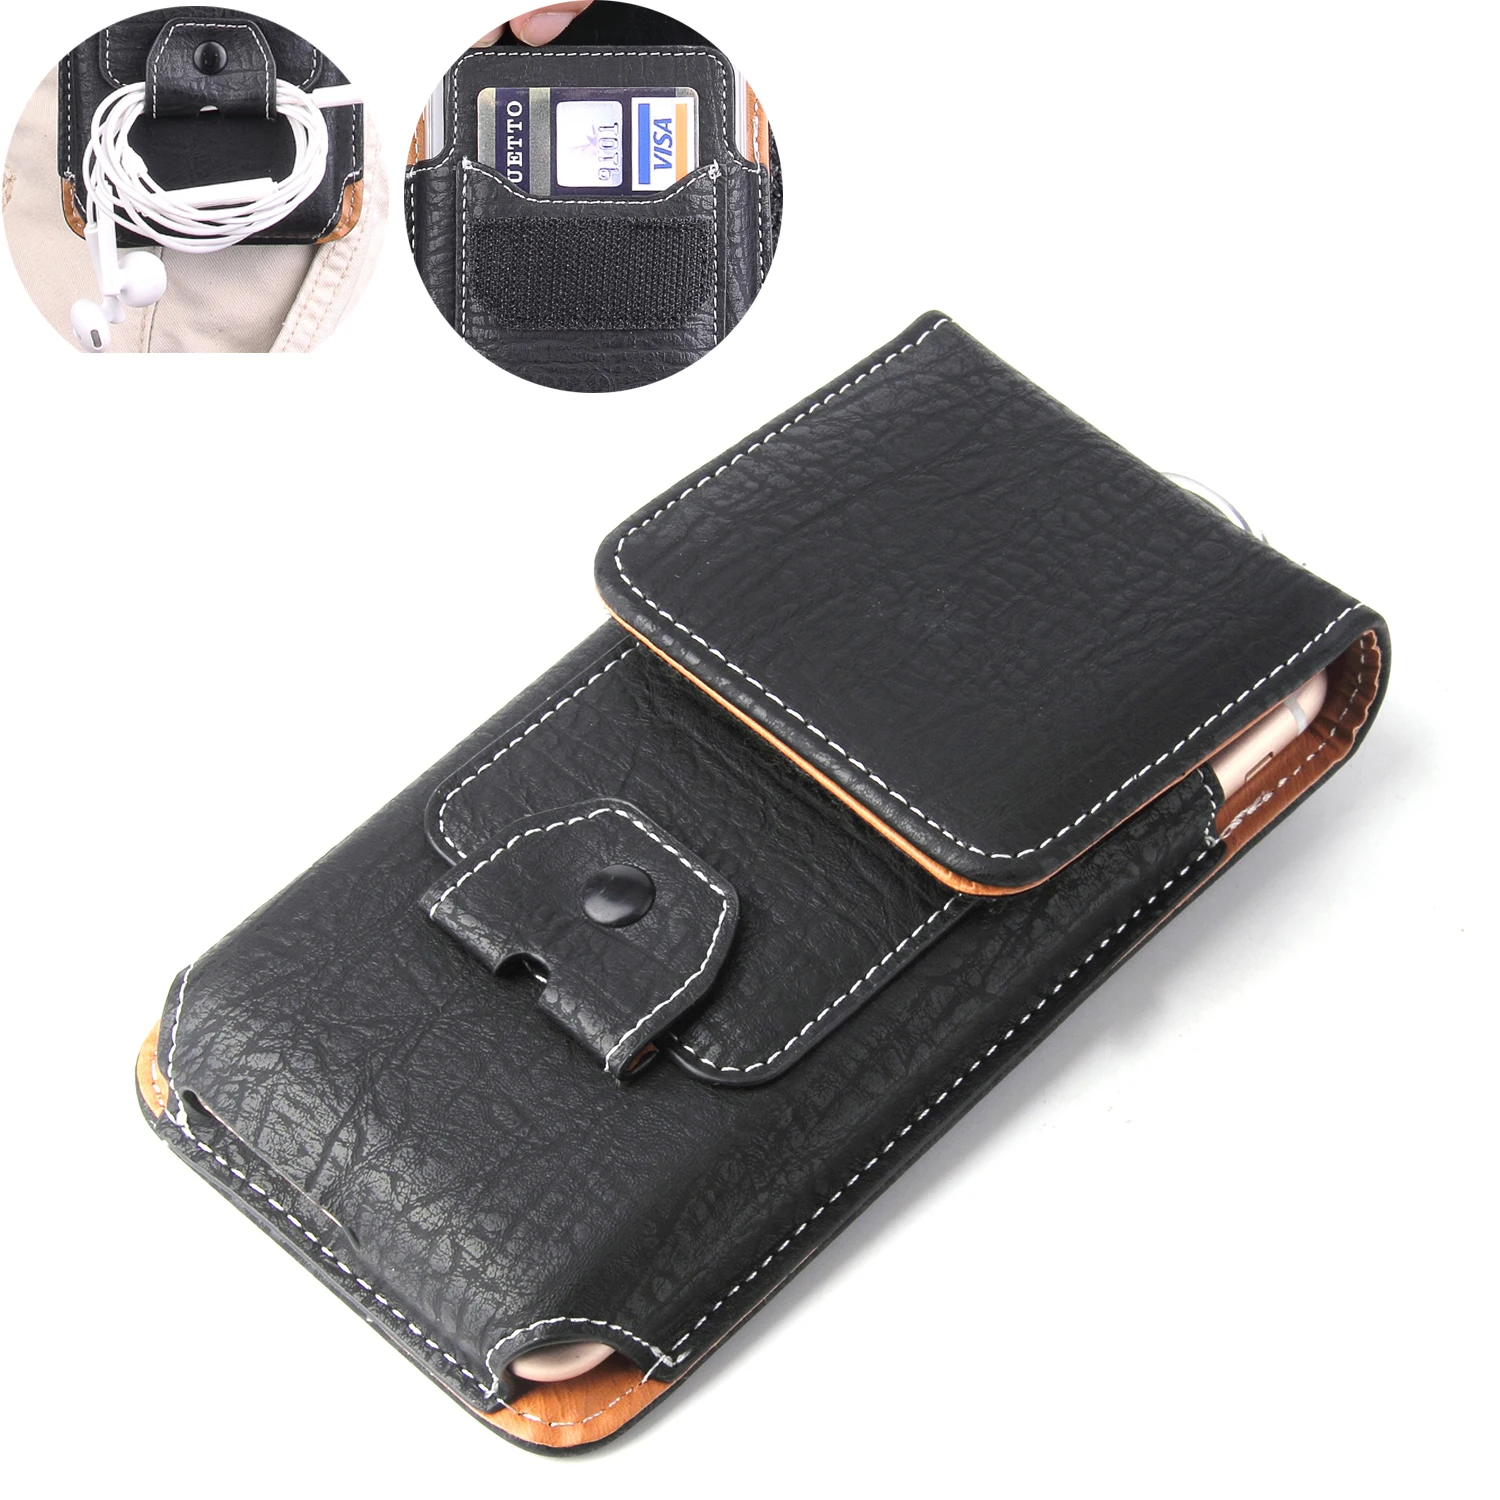 

Universal Pouch Leather Case For Oneplus One Plus 7 6 6T 5 5T 3 3T X 2 One Waist Bag Magnetic holster Belt Clip Phone Cover